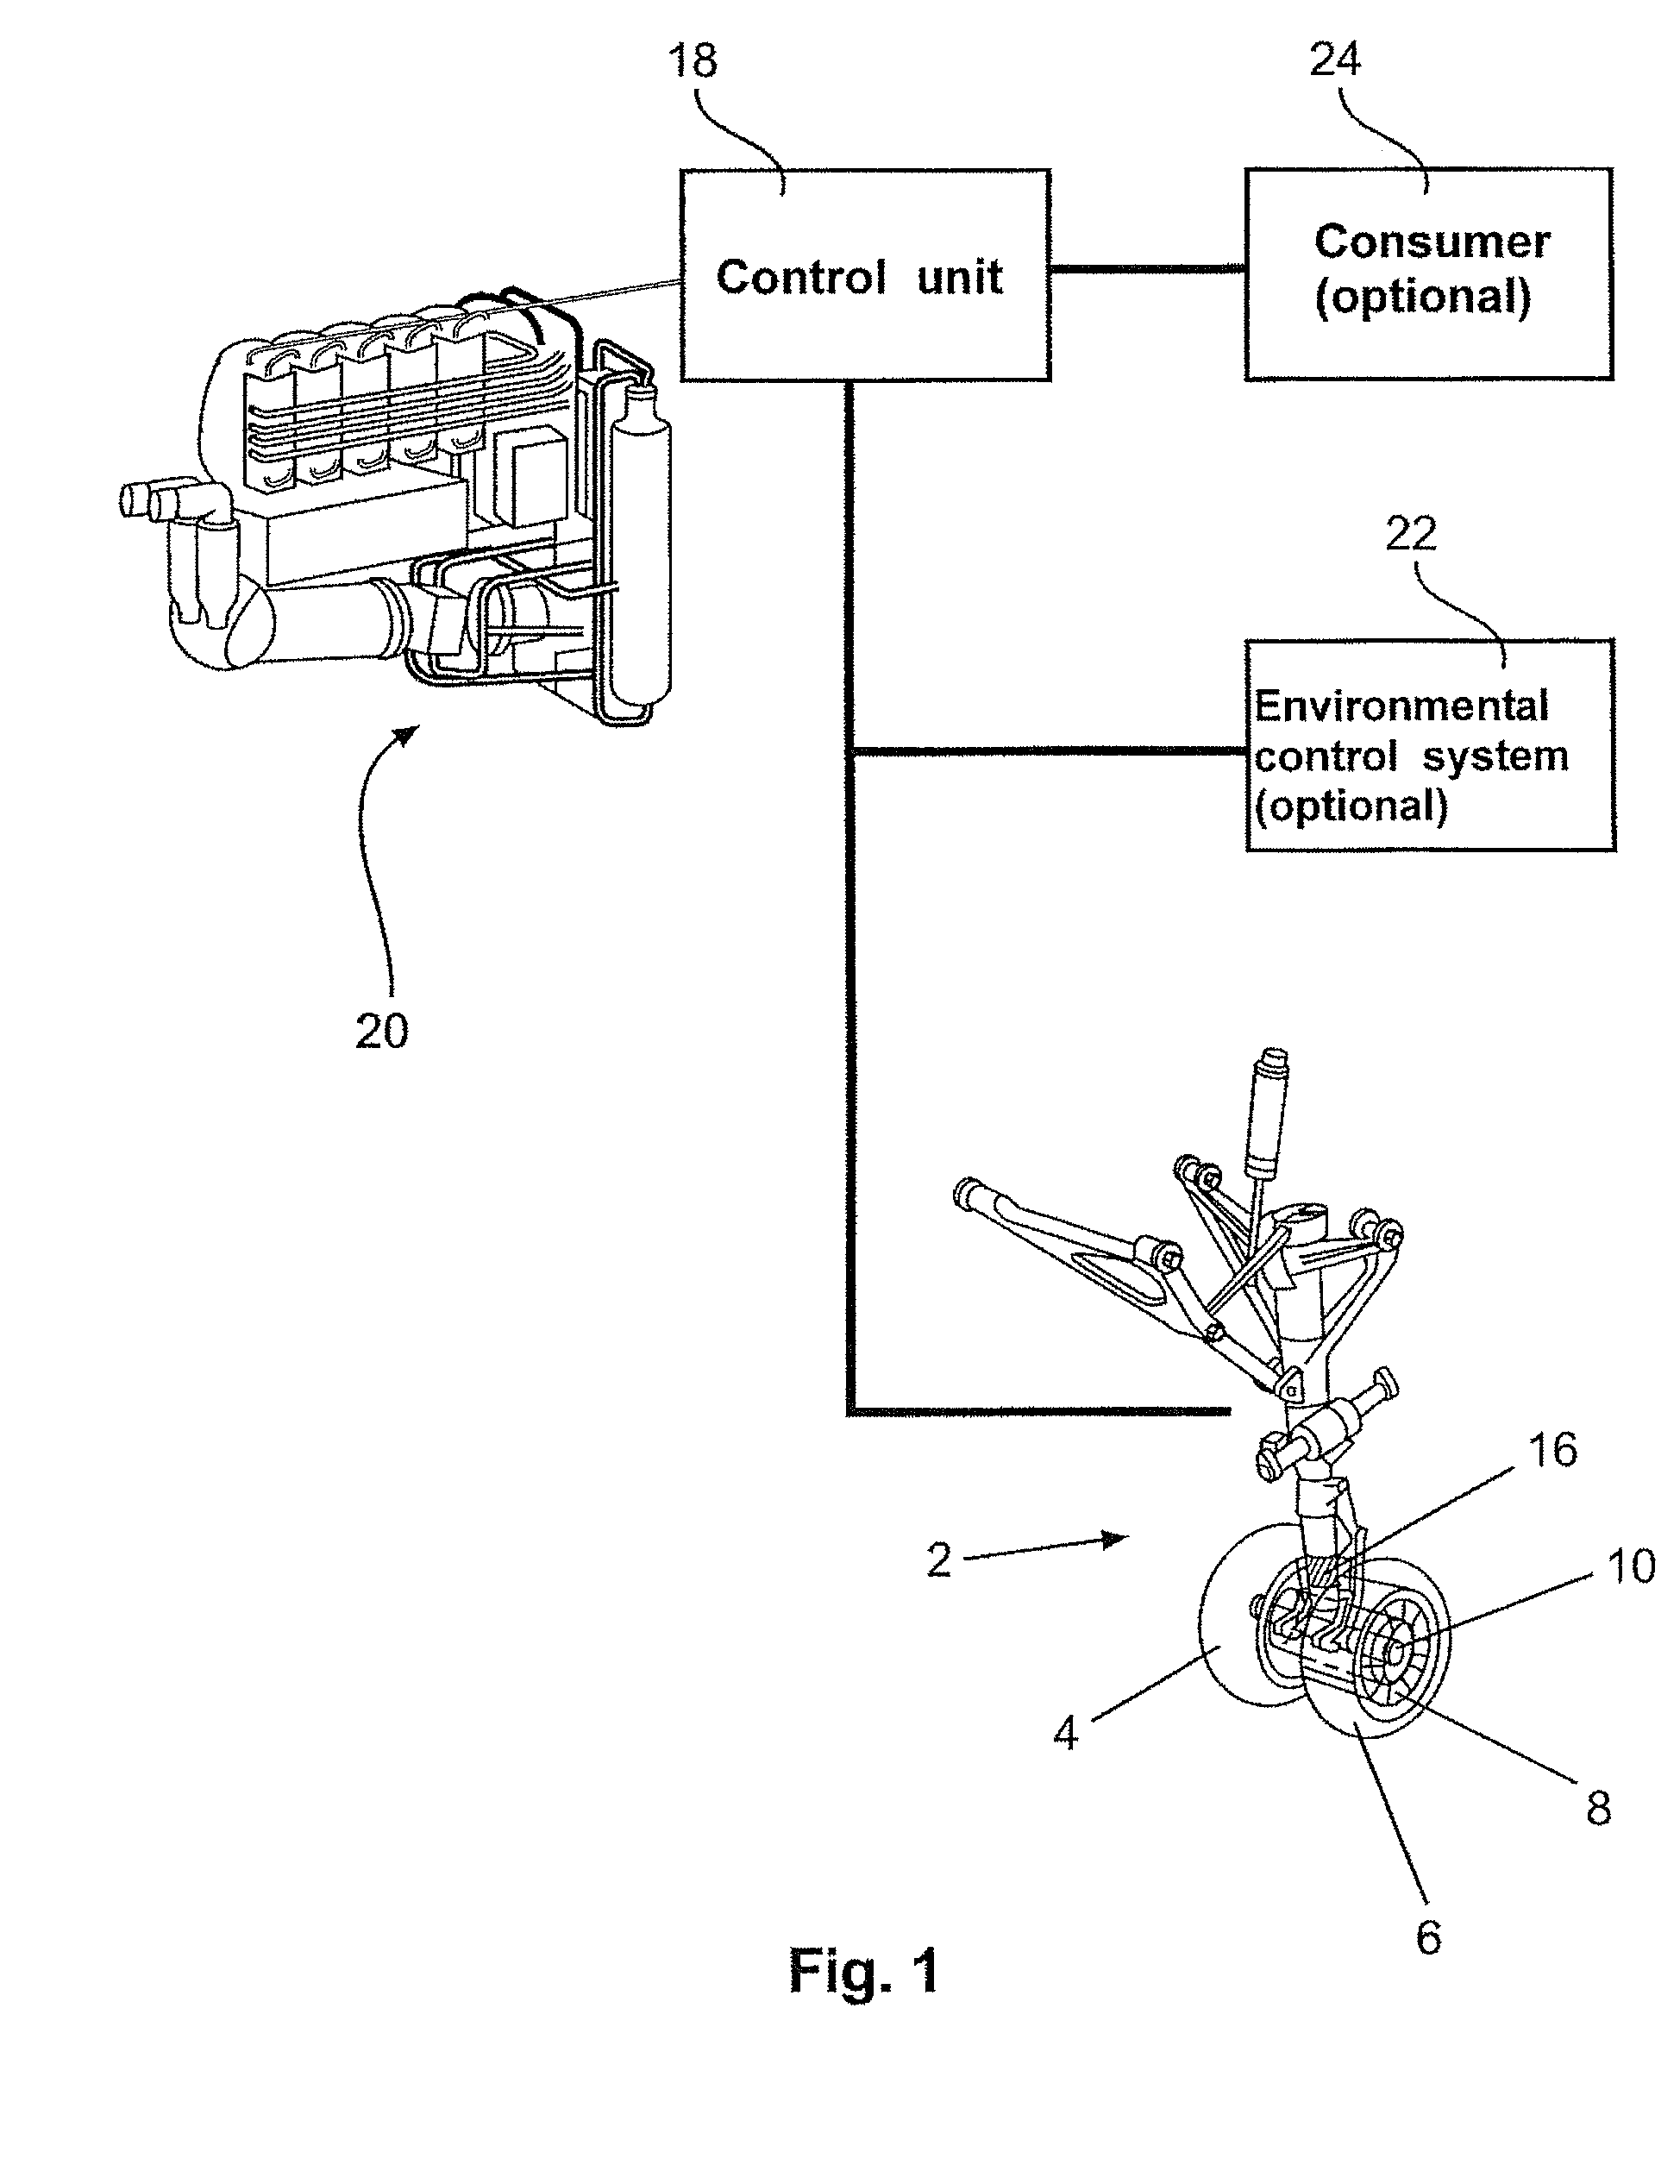 Wheel drive system for aircraft with a fuel cell as energy source